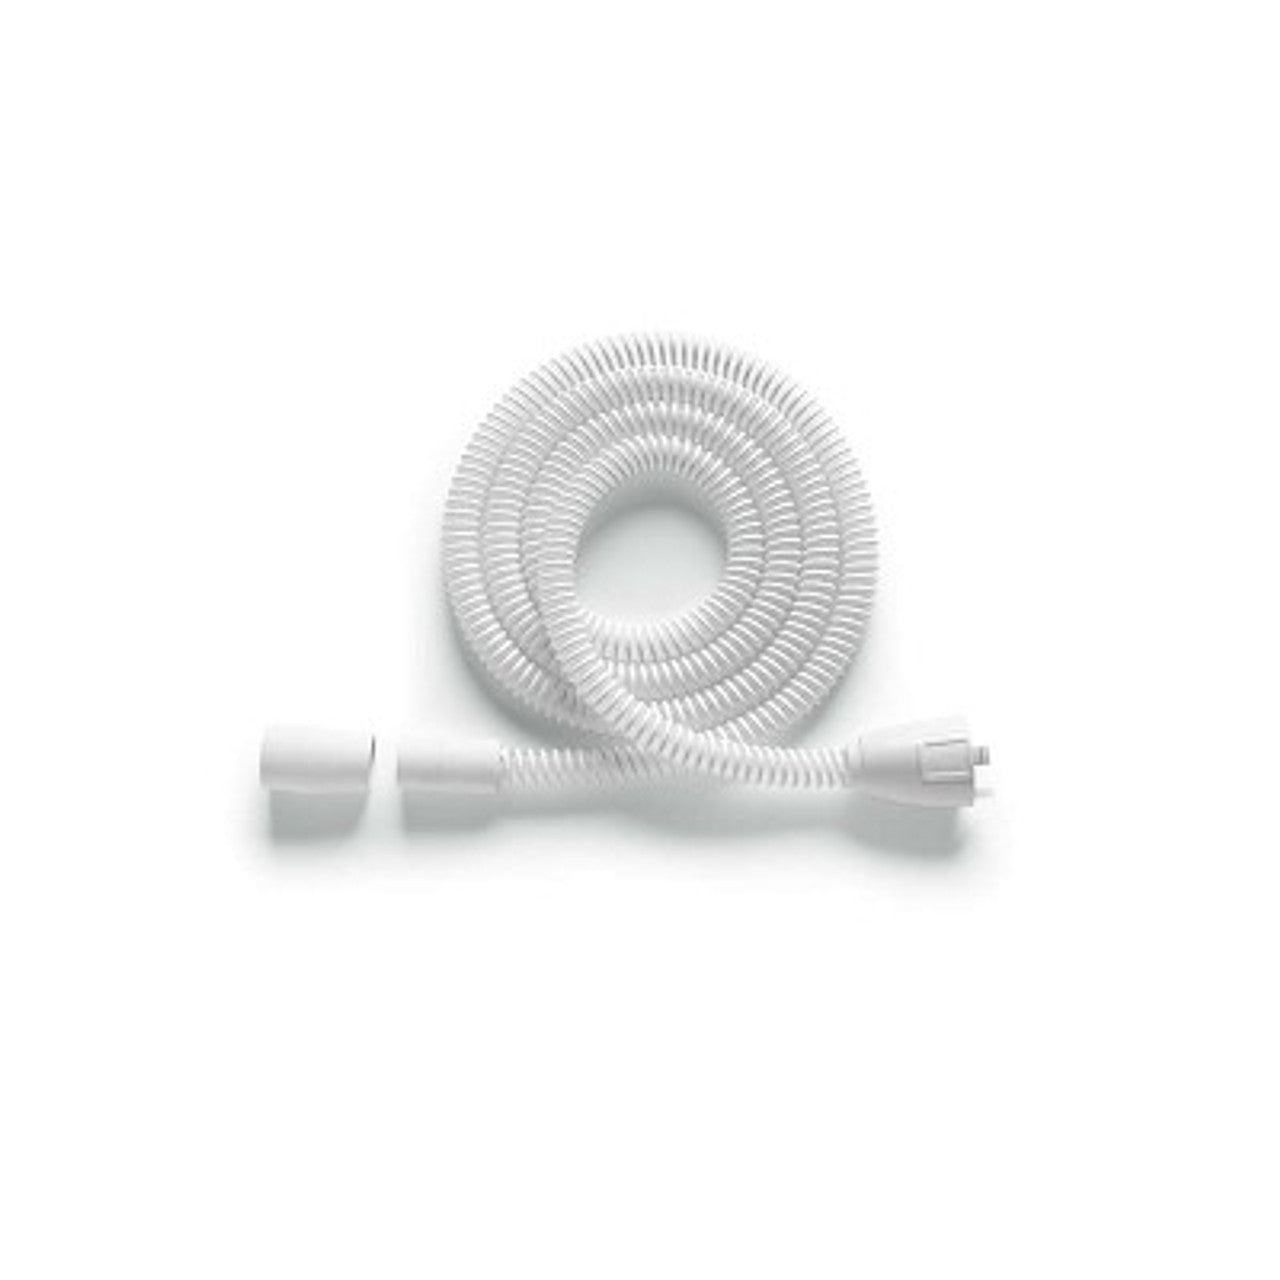 Philips Respironics 12mm Heated Micro-Flexible Tubing for DreamStation 2